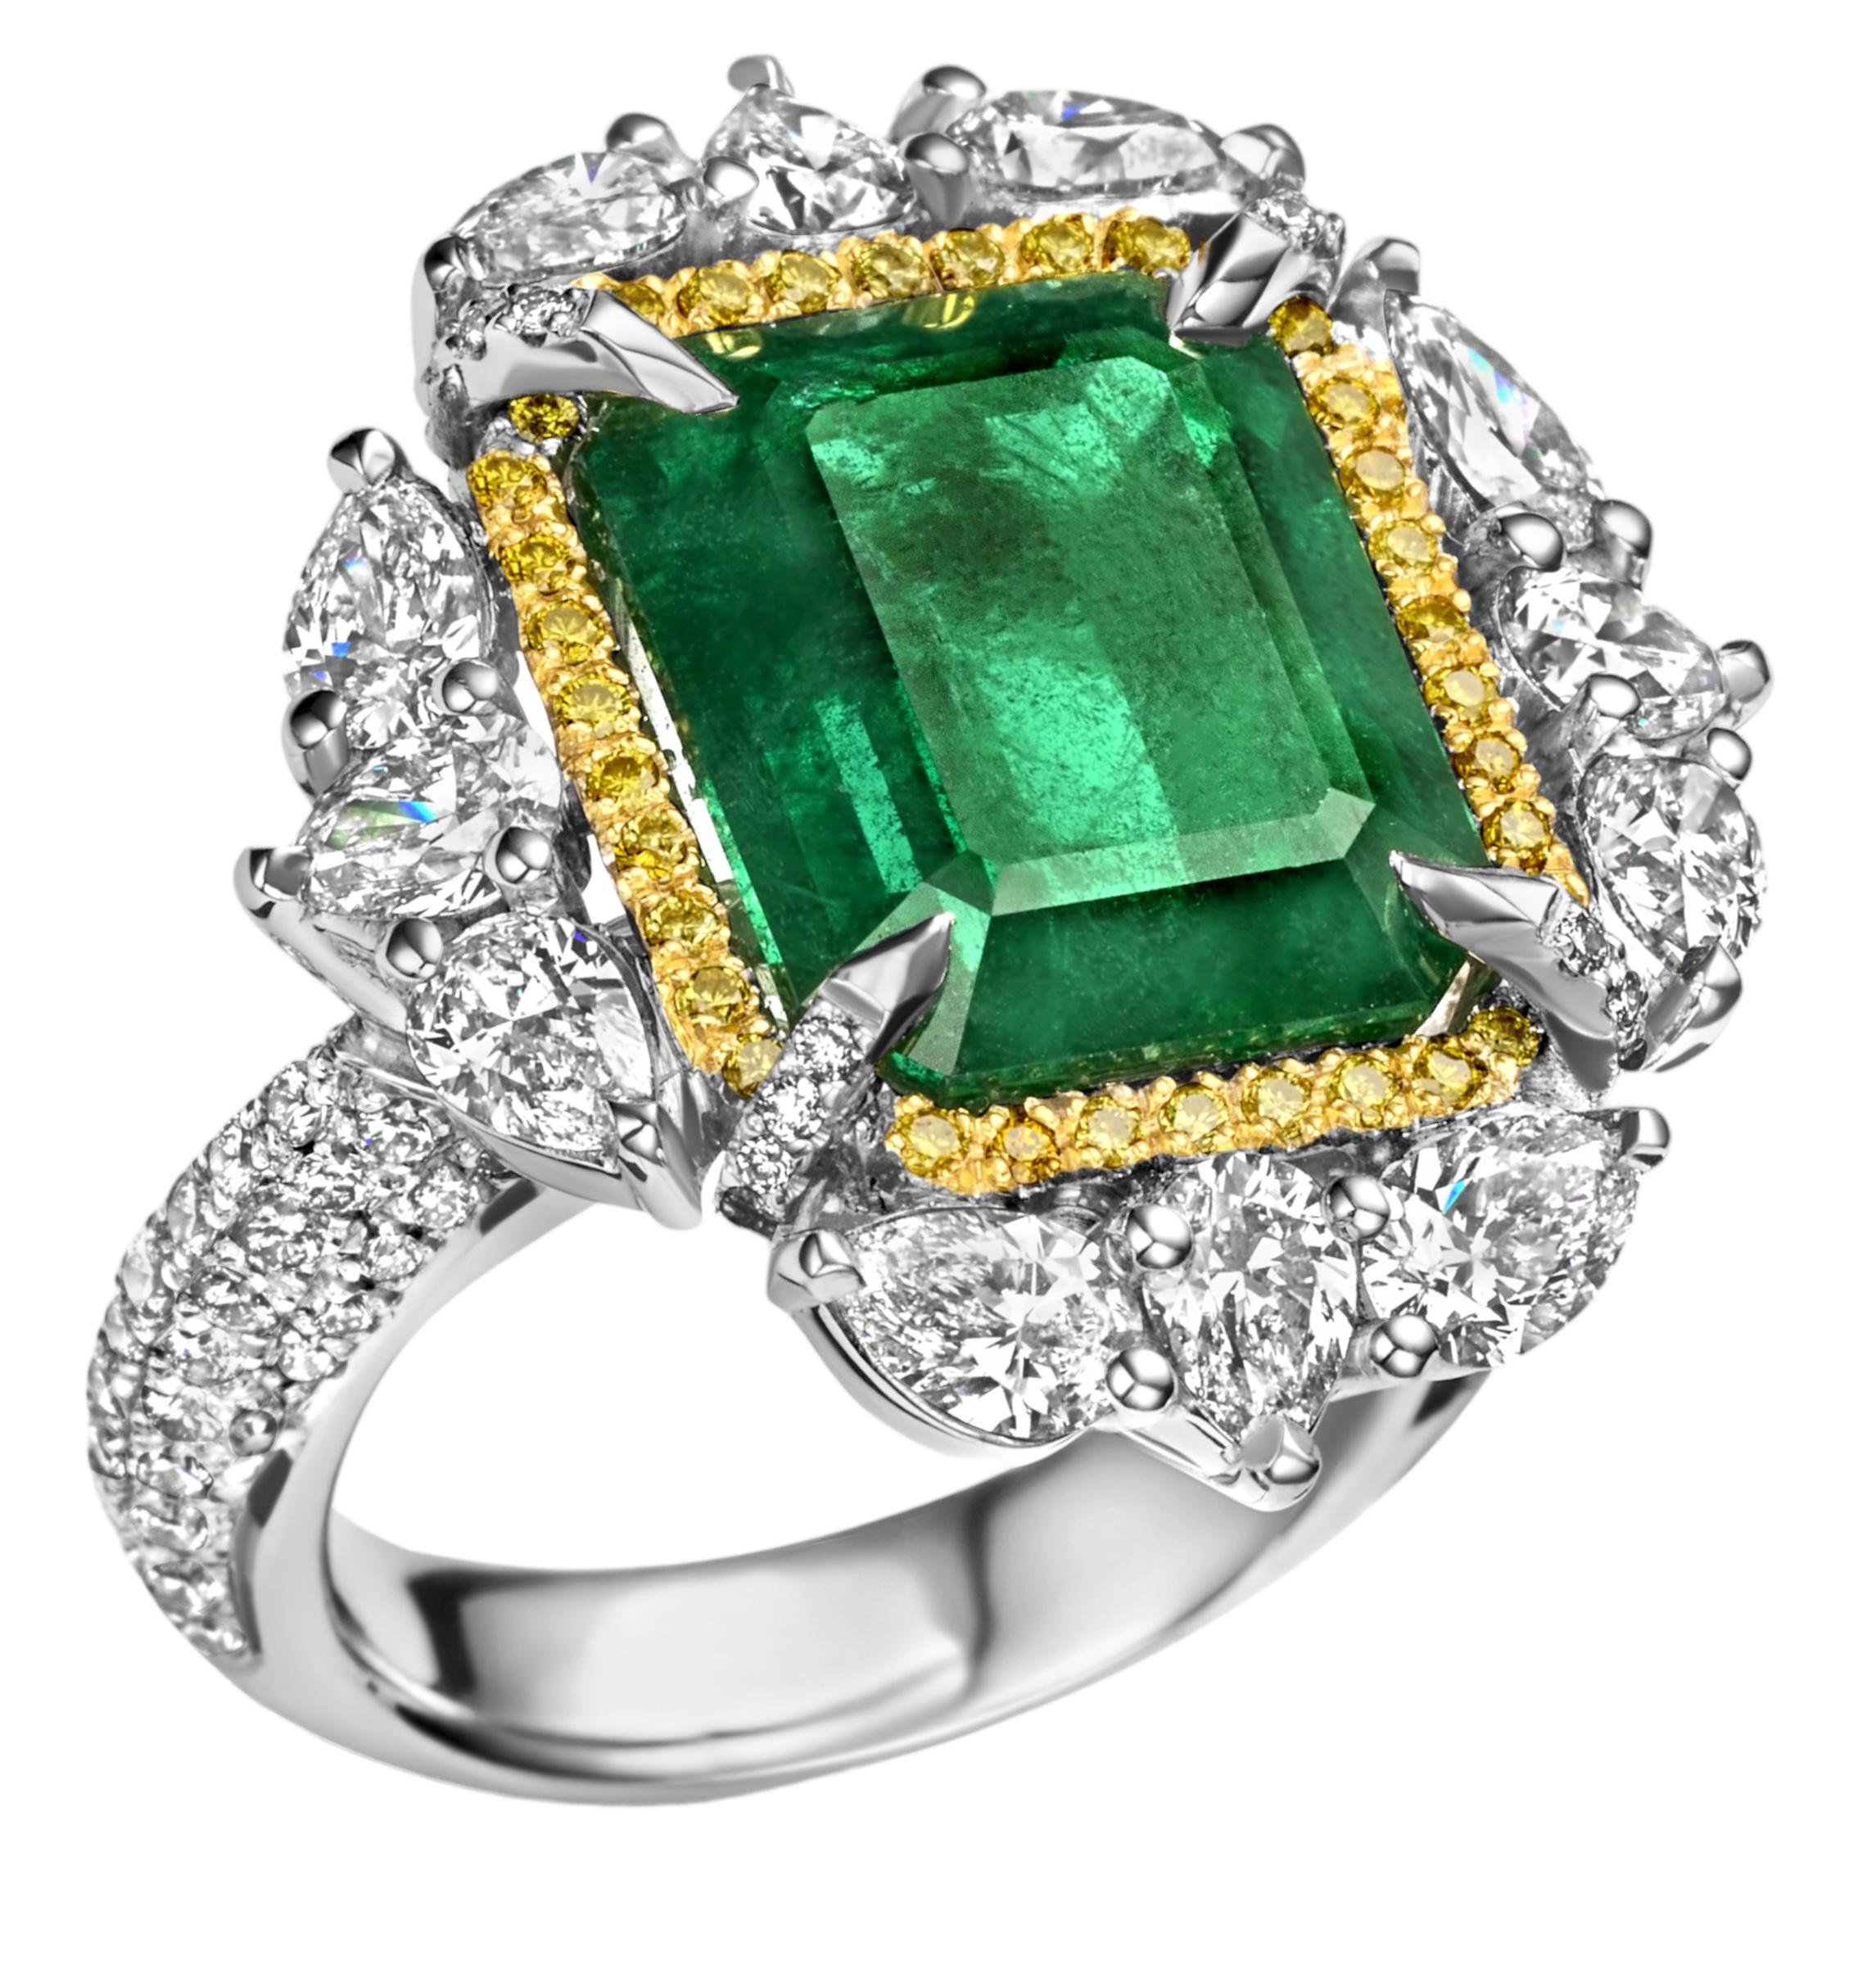 Emerald Cut 18 Karat White Gold Ring with 12.27 Carat Emerald, Pear Shape Diamonds 2.62 Ct For Sale